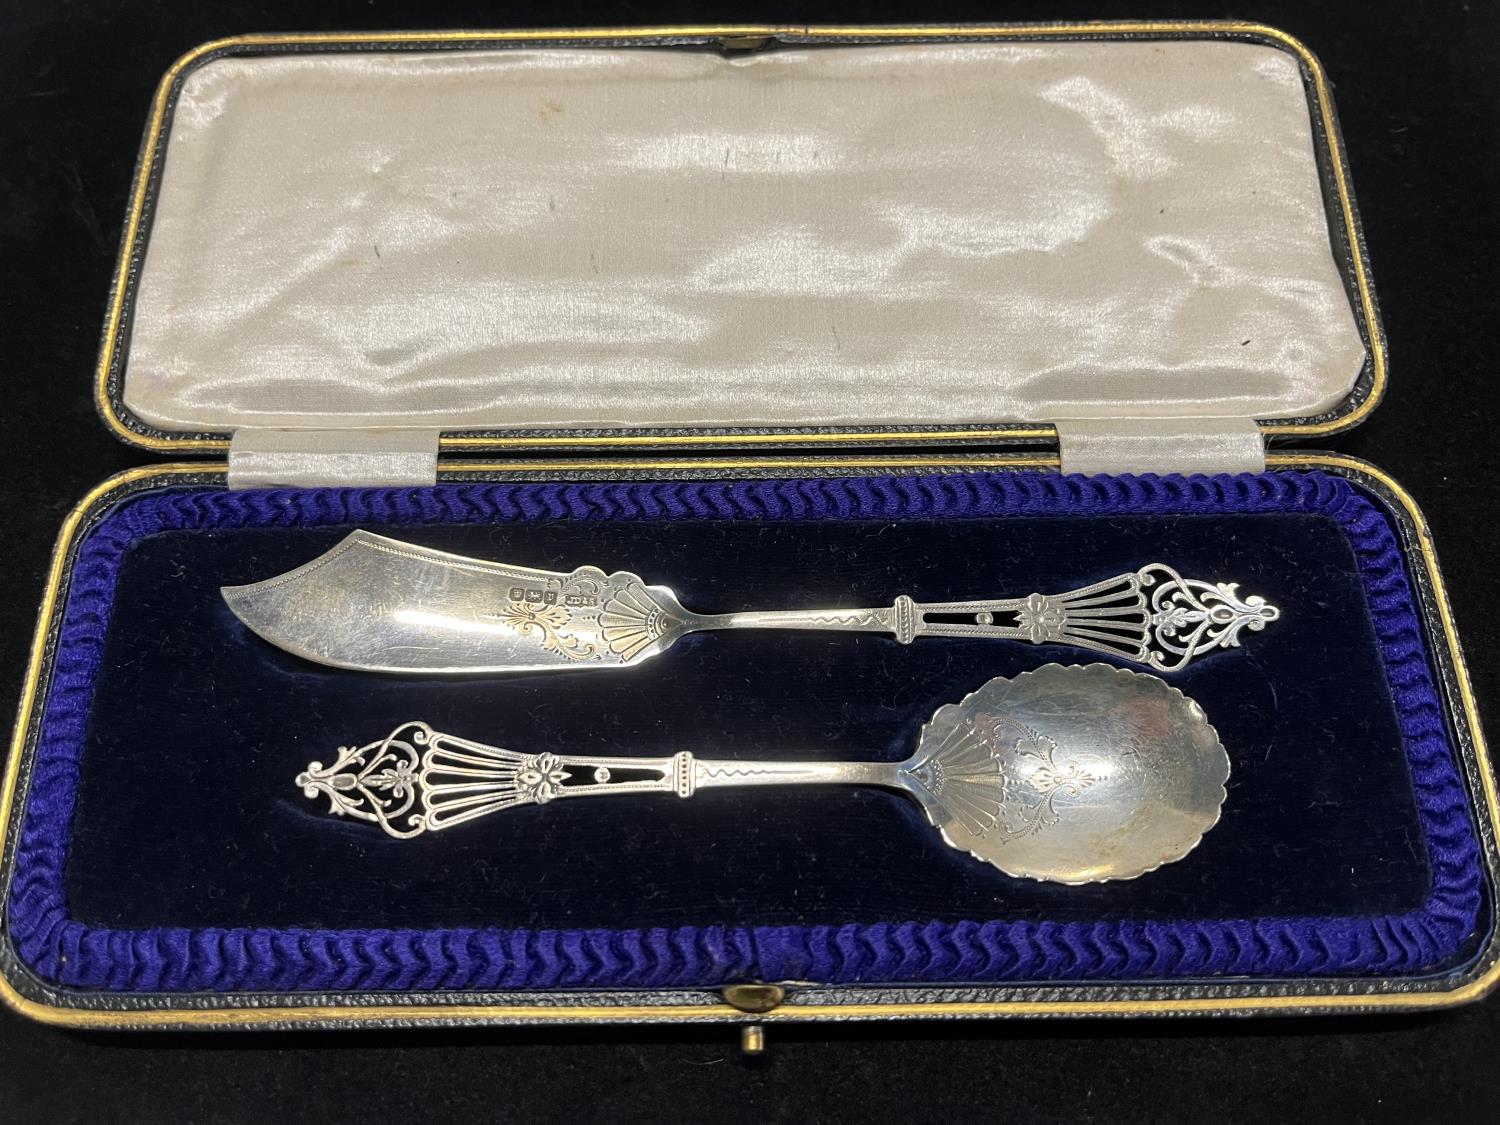 A hallmarked for Sheffield 1909 intricately worked knife and spoon set in original case by James